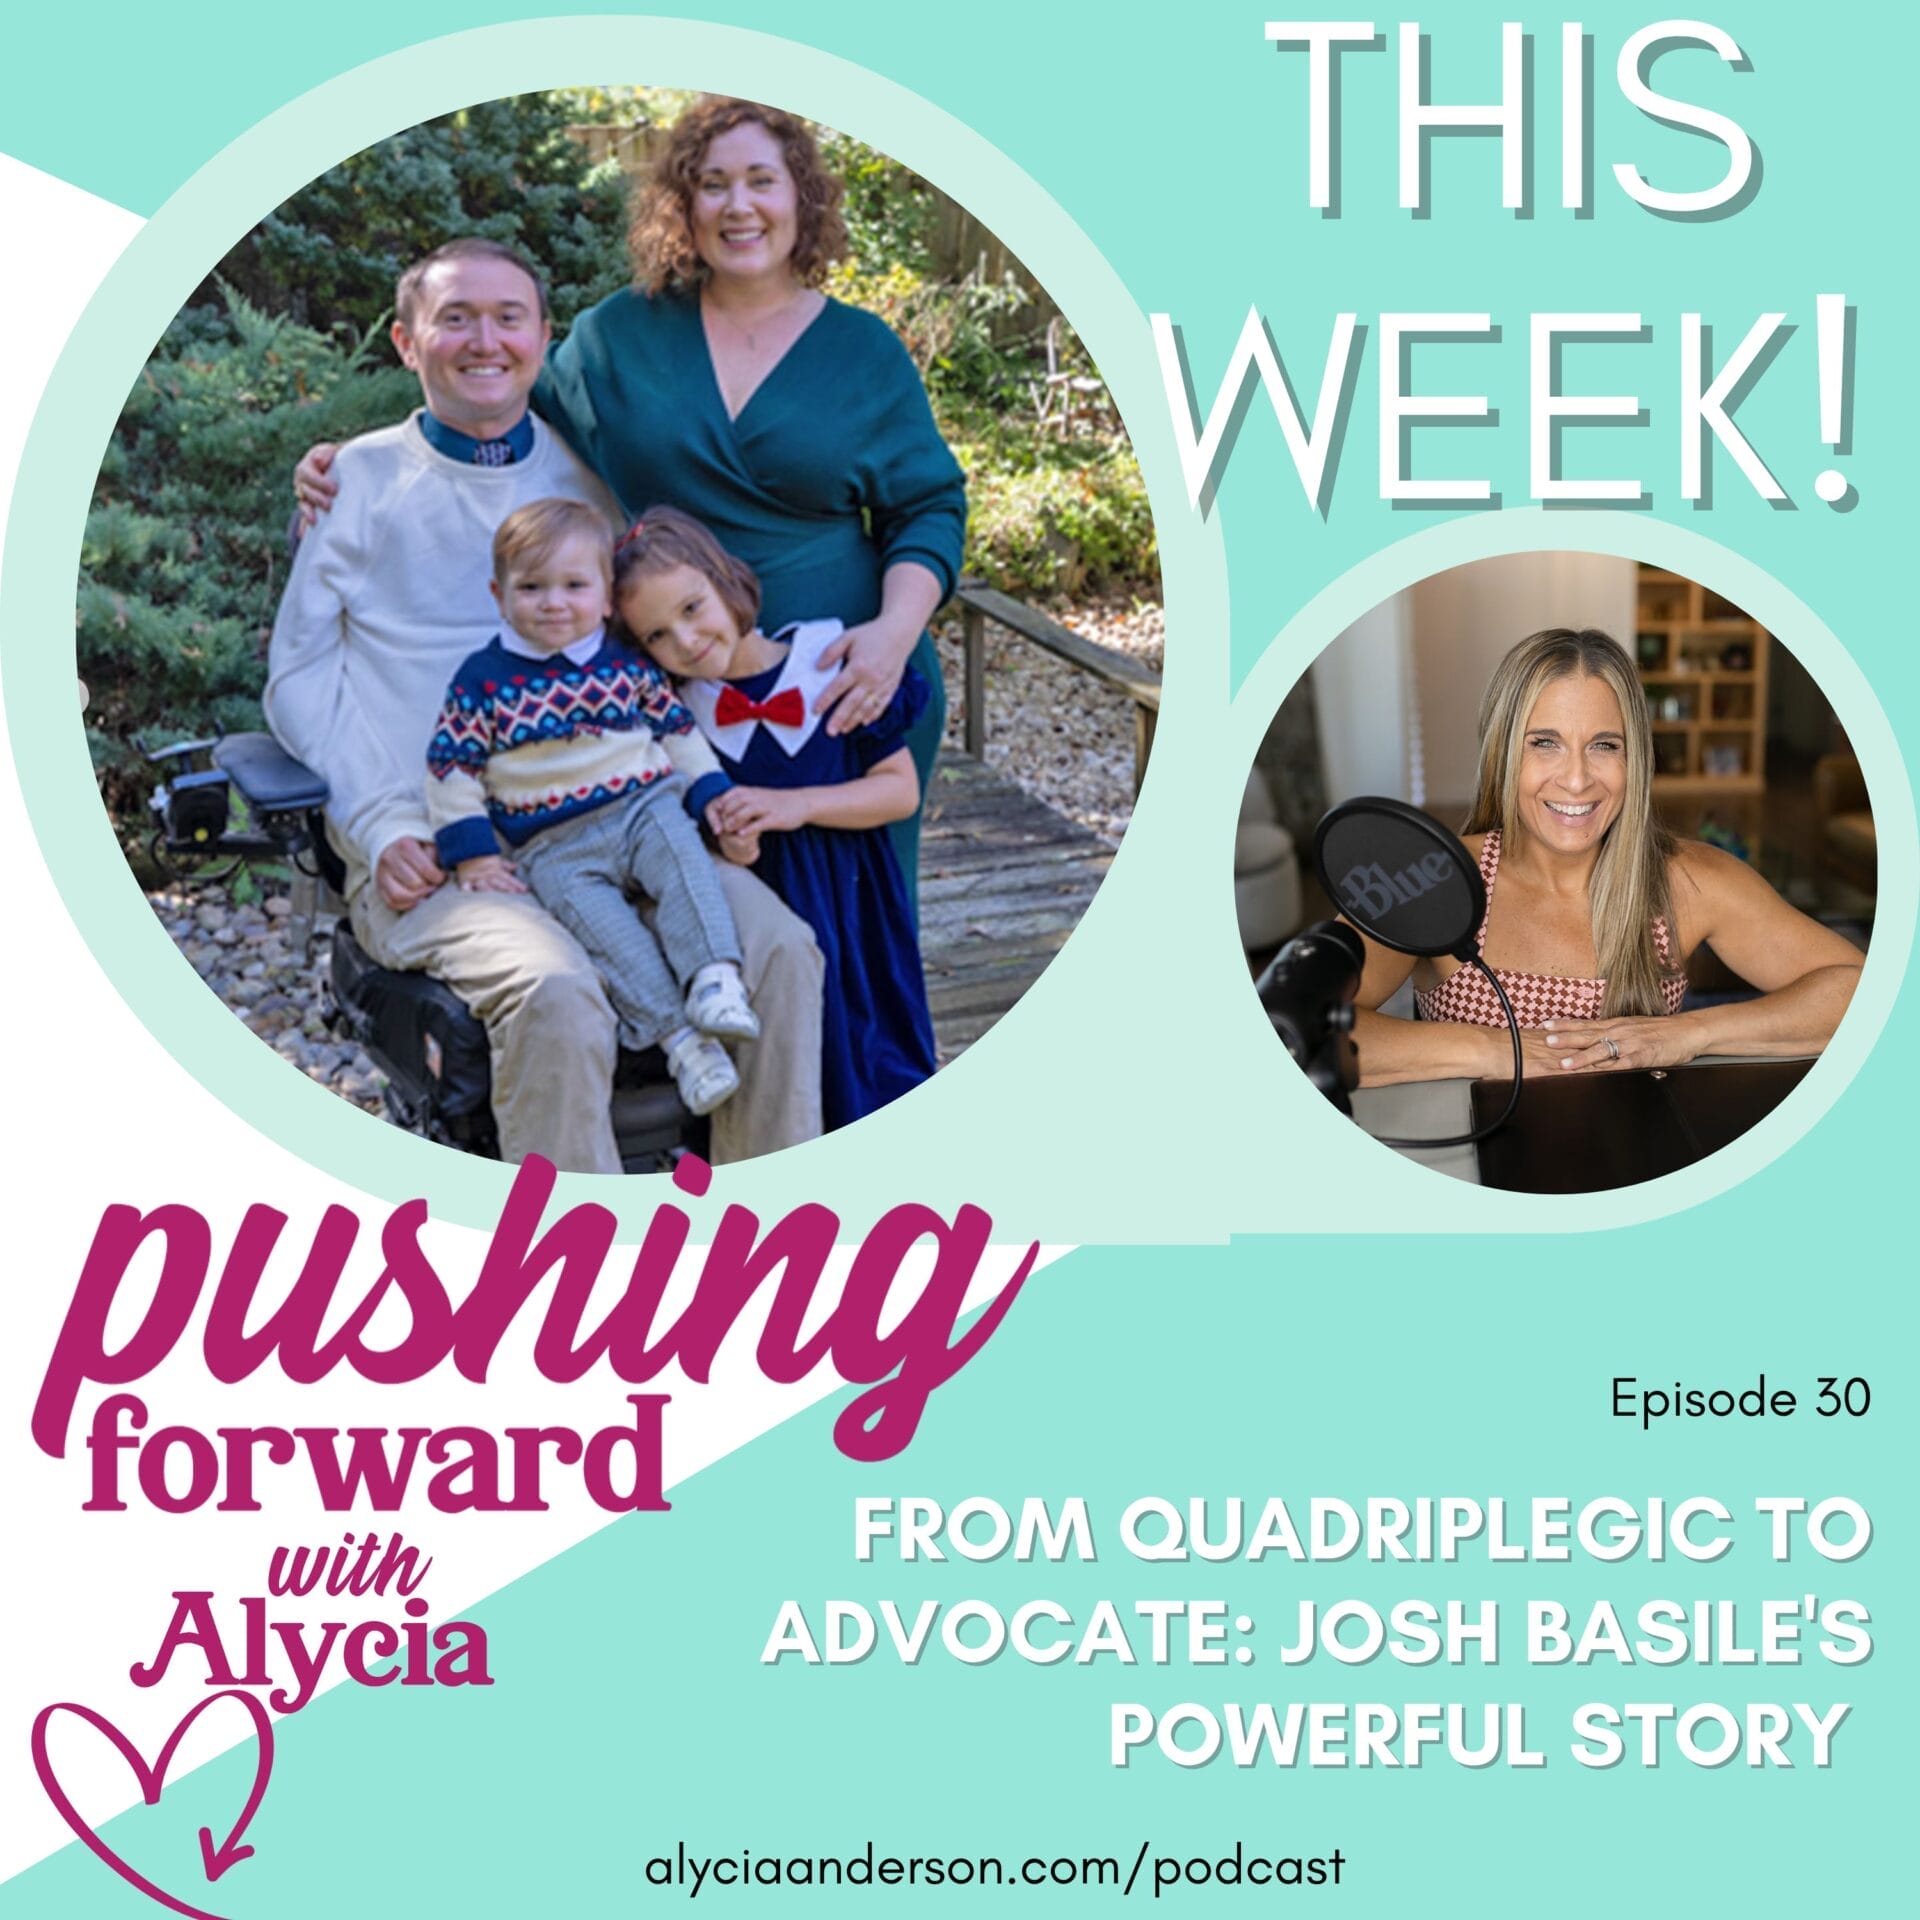 episode thirty of pushing forward with alycia podcast teaser featuring josh basile